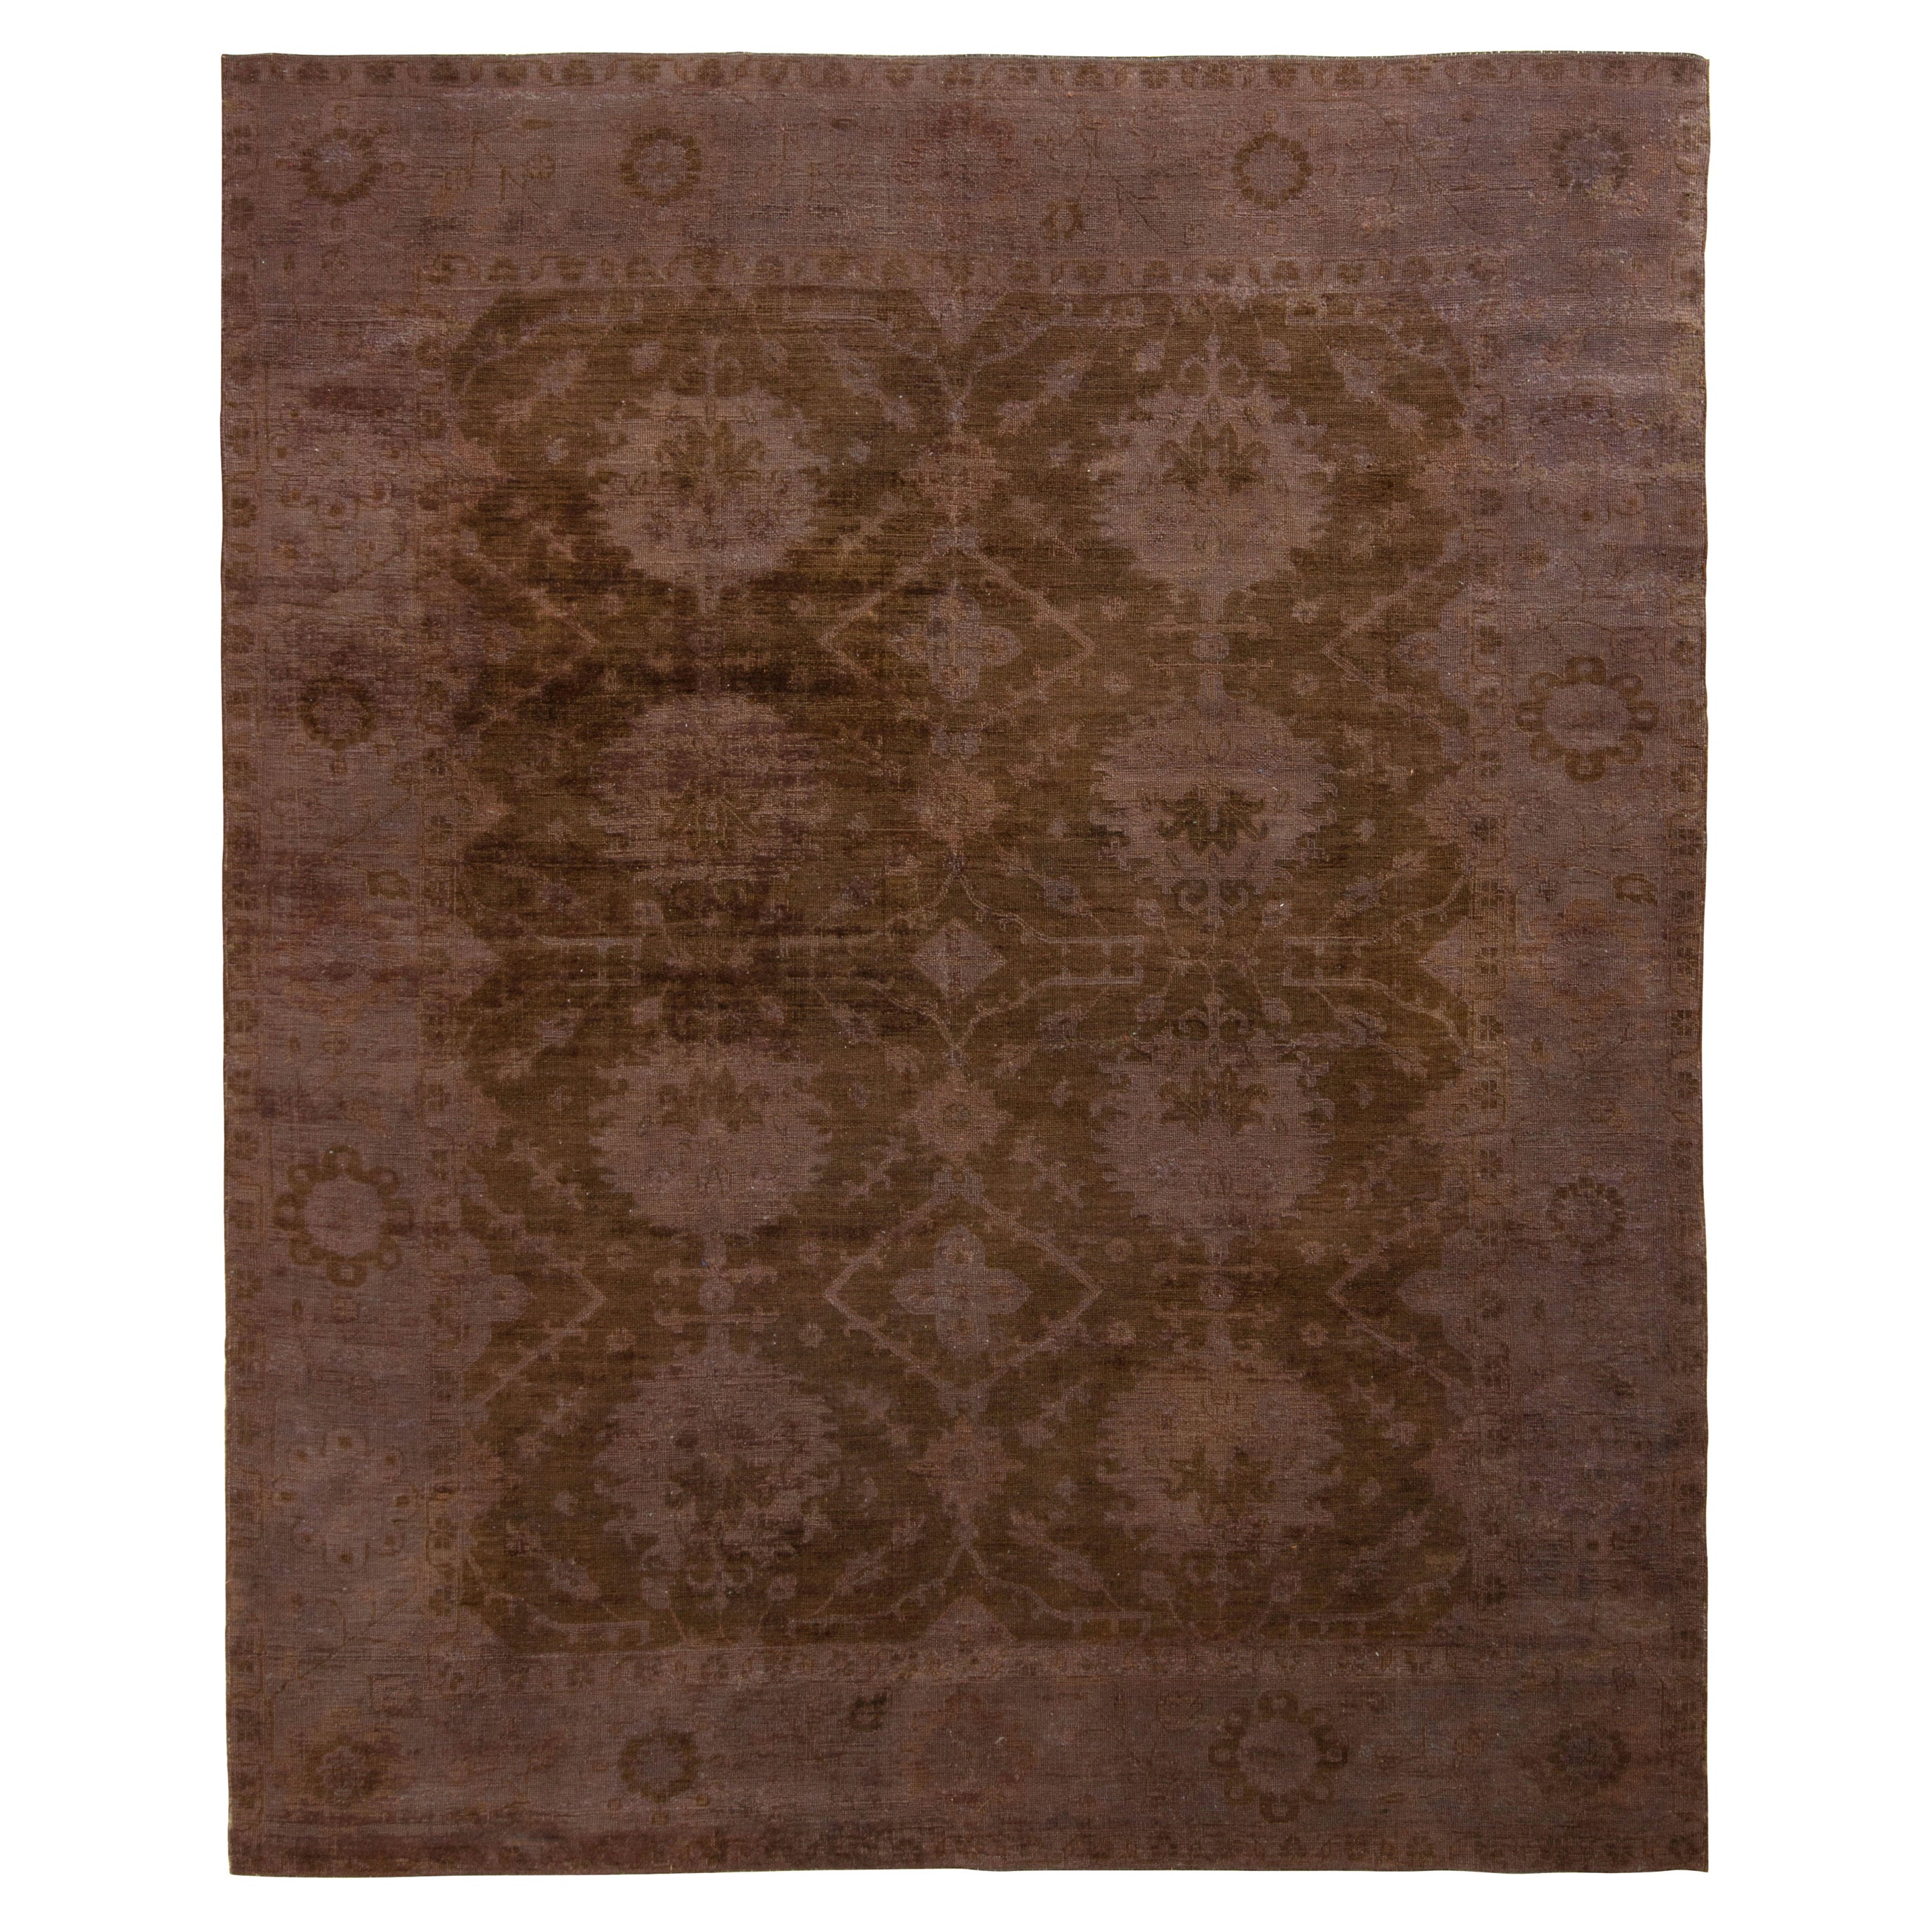 Rug & Kilim’s Transitional Style Rug in All over Brown, Purple Floral Pattern